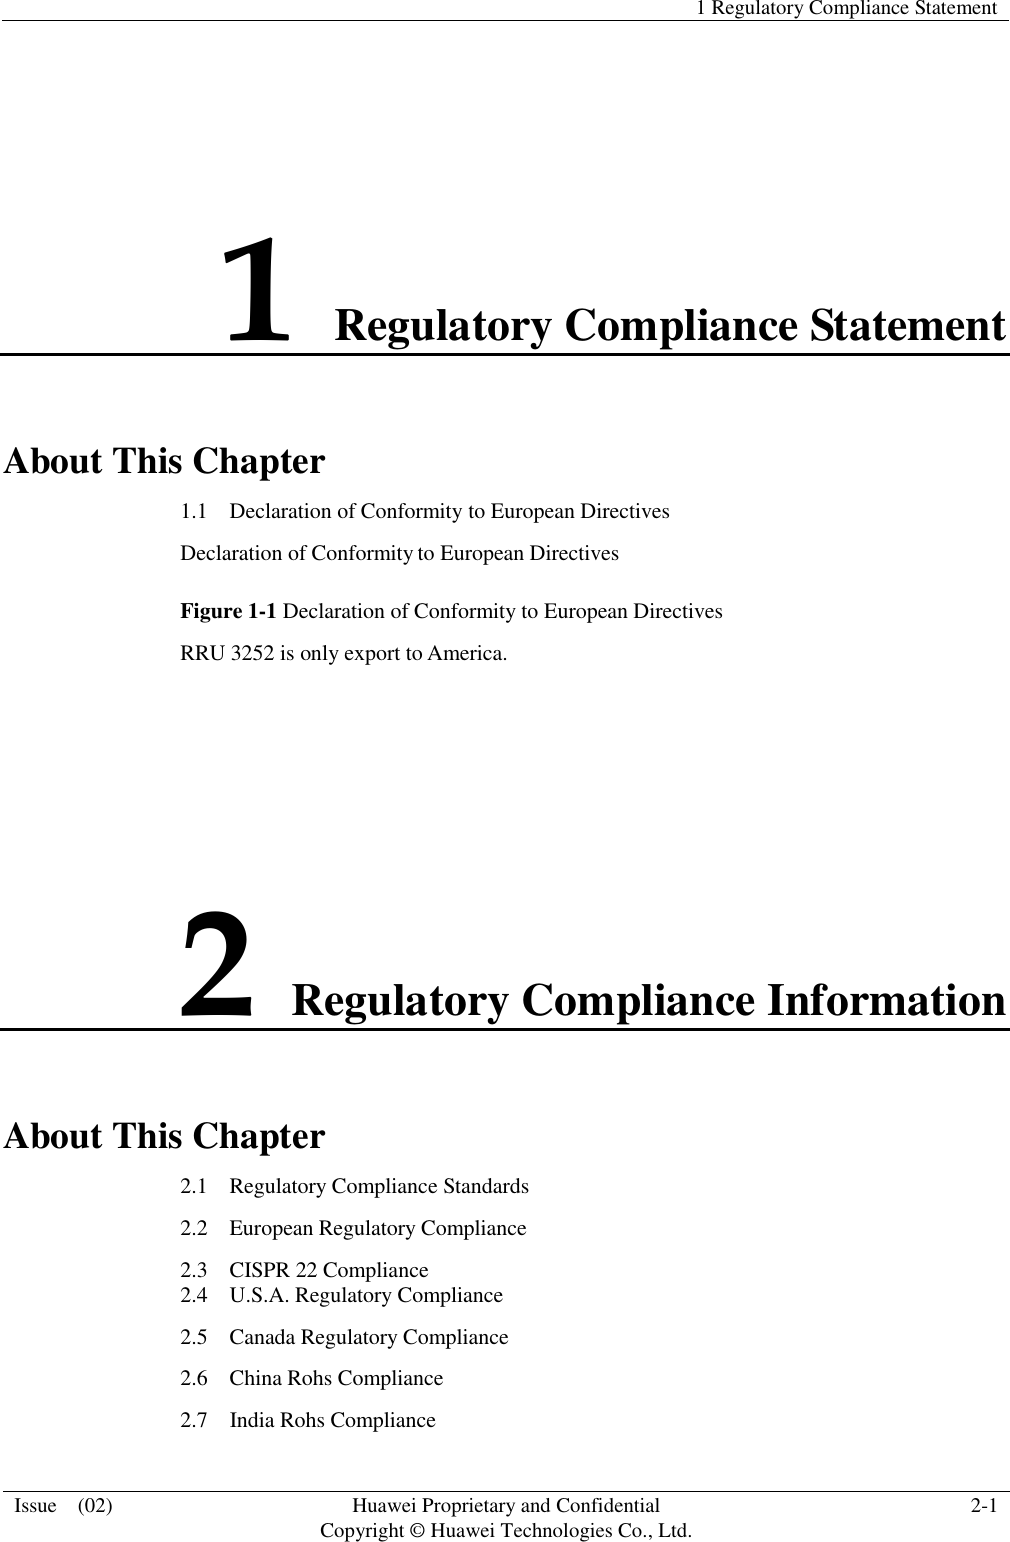   1 Regulatory Compliance Statement  Issue    (02) Huawei Proprietary and Confidential                                     Copyright © Huawei Technologies Co., Ltd. 2-1  1 Regulatory Compliance Statement About This Chapter 1.1    Declaration of Conformity to European Directives Declaration of Conformity to European Directives Figure 1-1 Declaration of Conformity to European Directives   RRU 3252 is only export to America.  2 Regulatory Compliance Information About This Chapter 2.1    Regulatory Compliance Standards 2.2    European Regulatory Compliance 2.3  CISPR 22 Compliance                                                   2.4  U.S.A. Regulatory Compliance 2.5  Canada Regulatory Compliance 2.6  China Rohs Compliance 2.7  India Rohs Compliance 